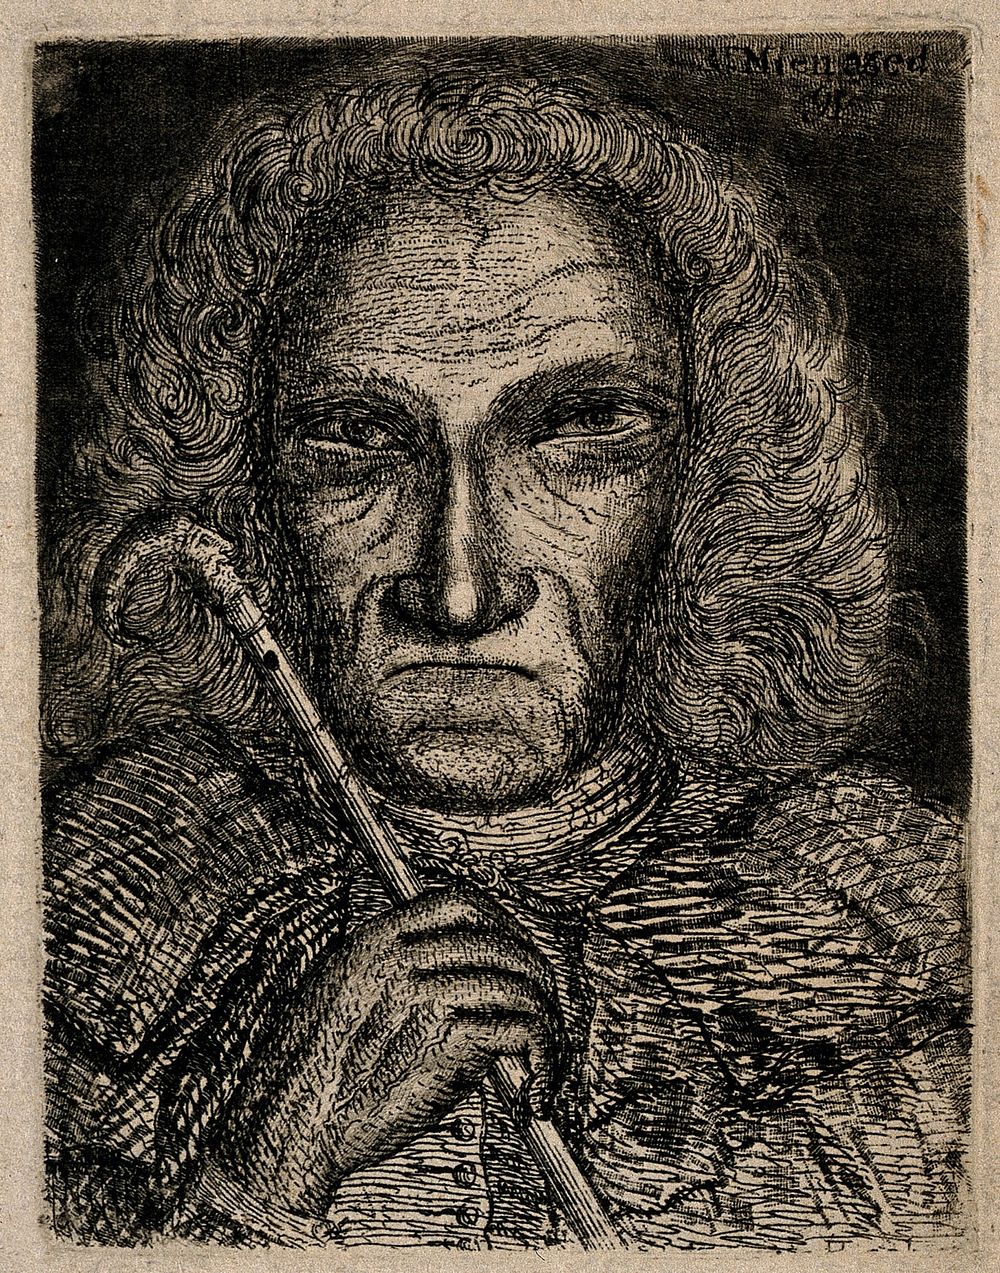 Richard Mien, aged 91. Etching.